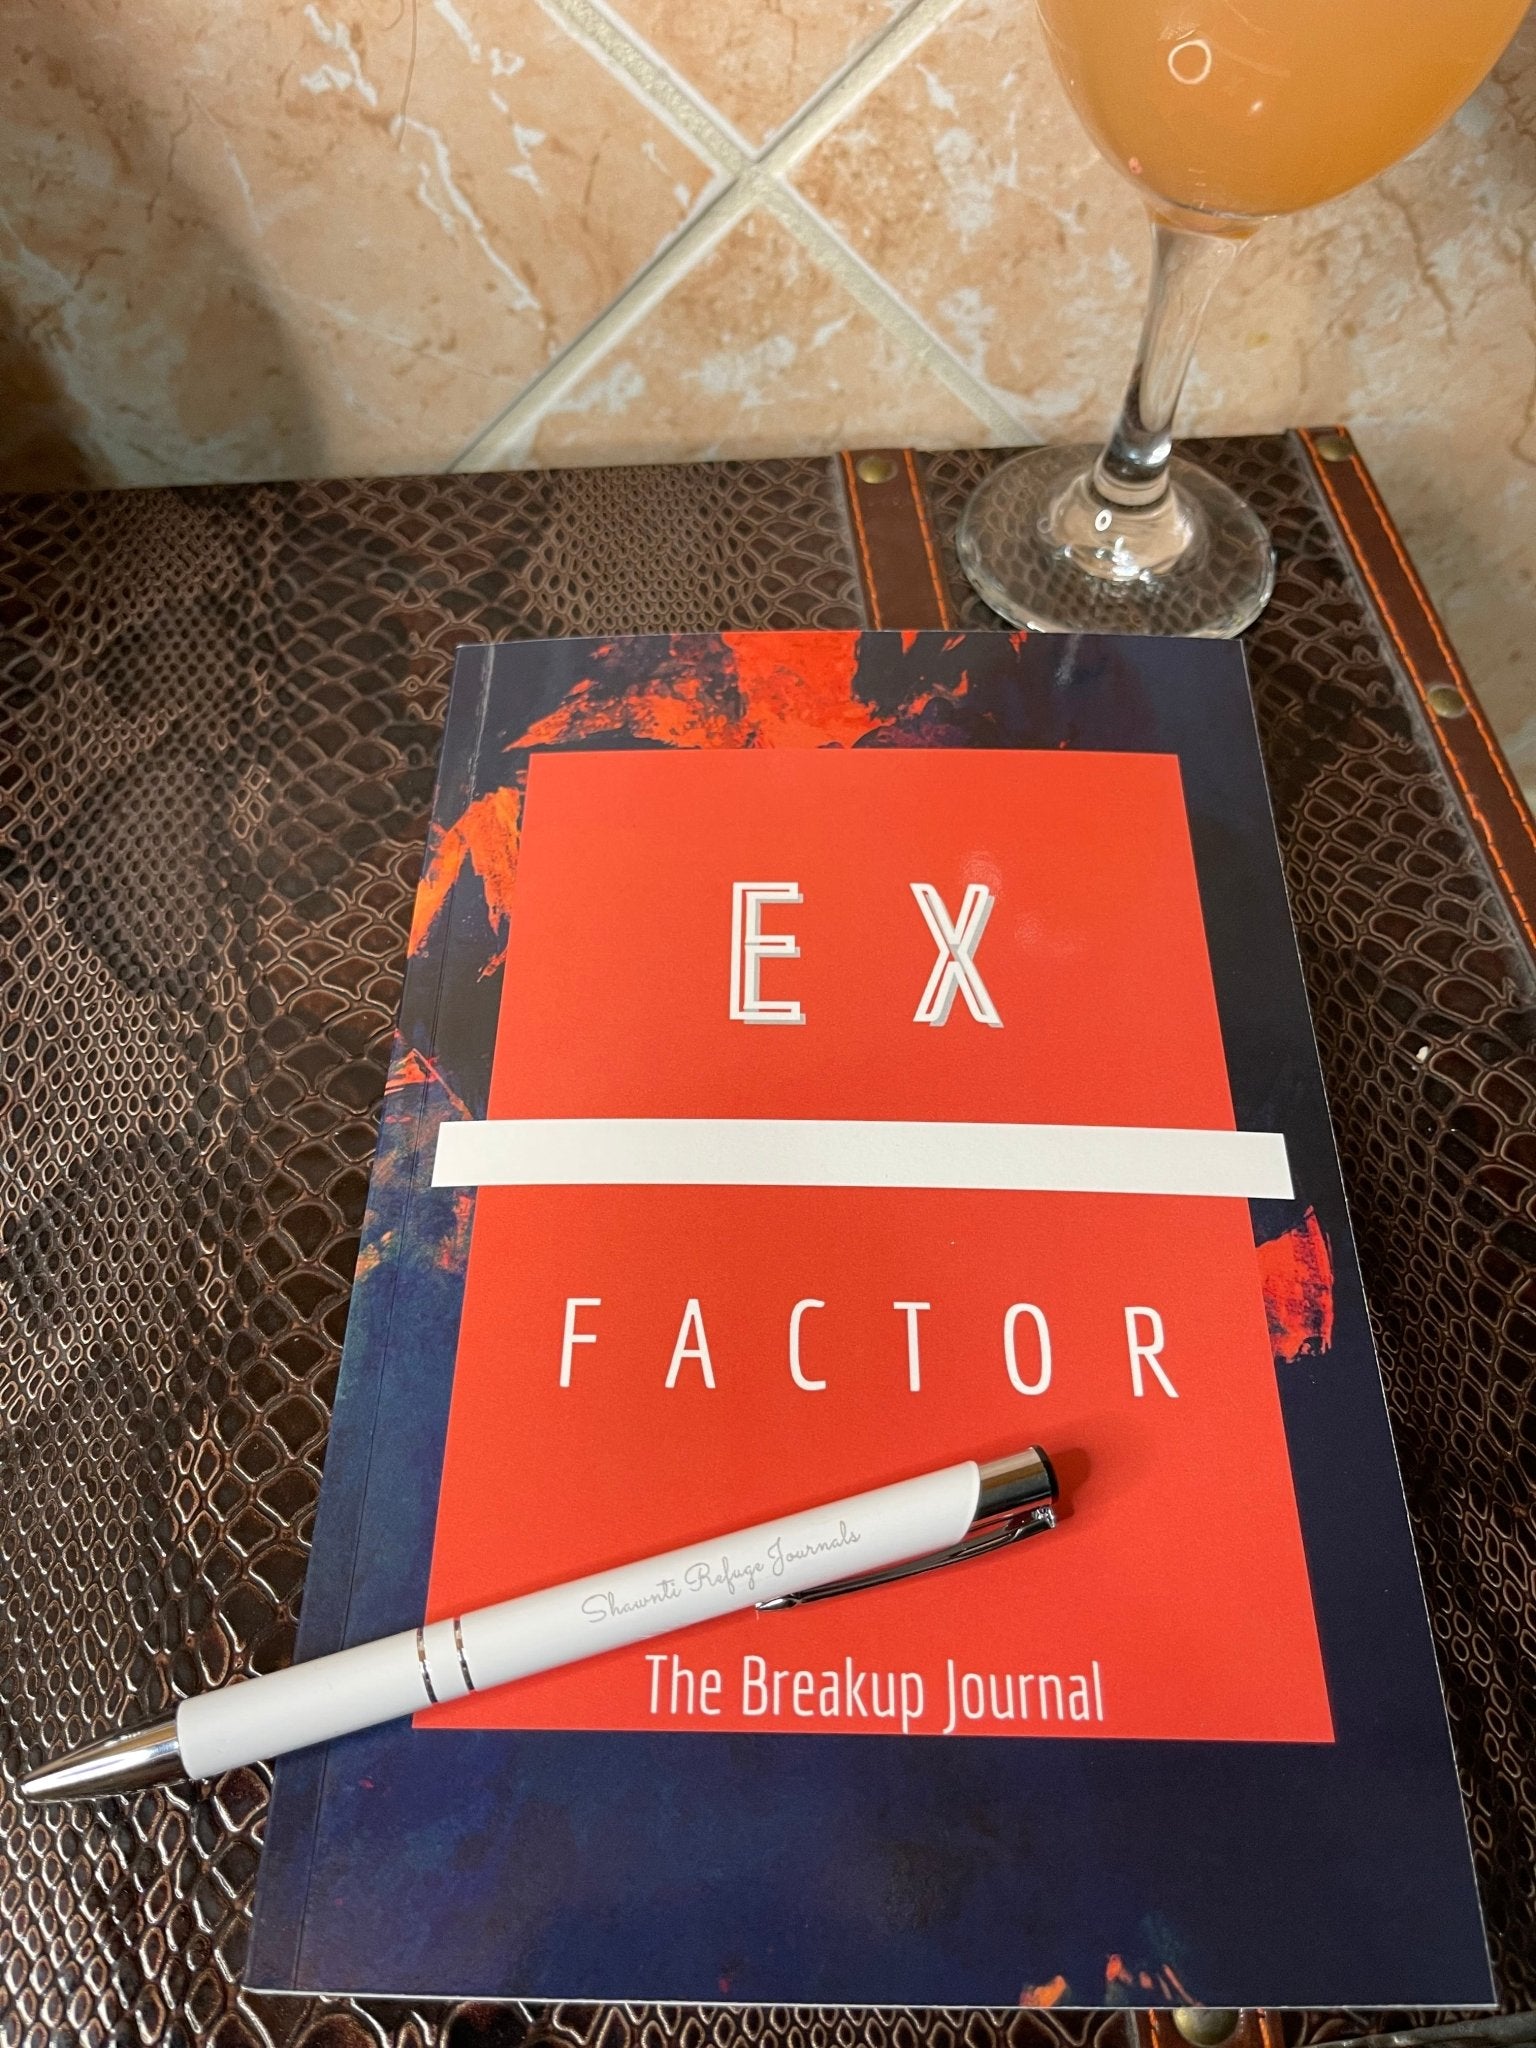 EX Factor: The Breakup Guided Journal - Shawnti Refuge Journals